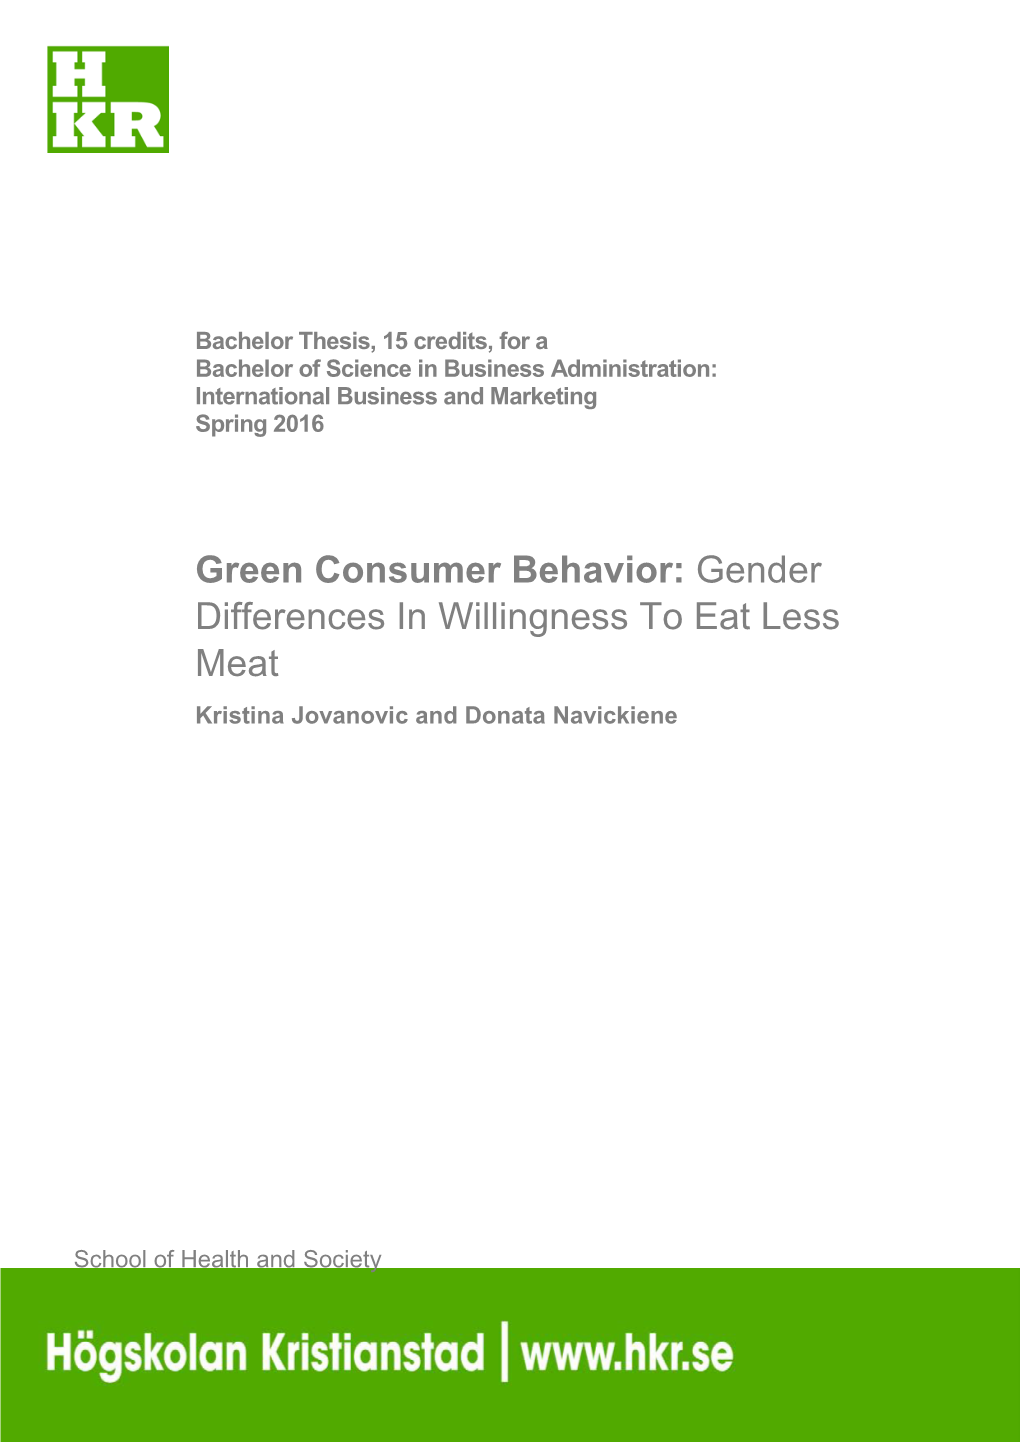 Green Consumer Behavior: Gender Differences in Willingness to Eat Less Meat Kristina Jovanovic and Donata Navickiene